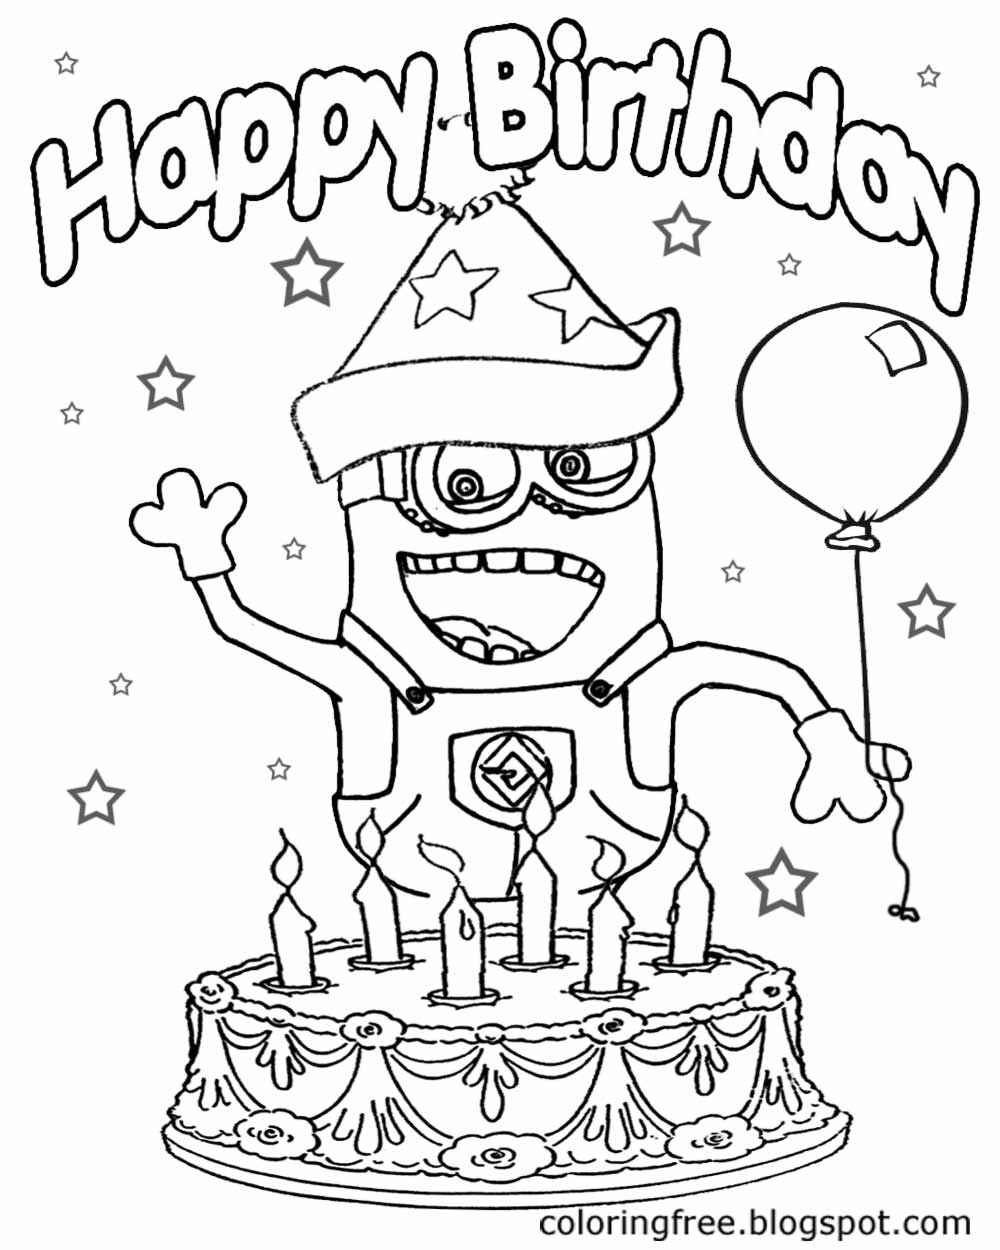 Download Free Coloring Pages Printable Pictures To Color Kids Drawing ideas: Kids Costume Minion Coloring ...